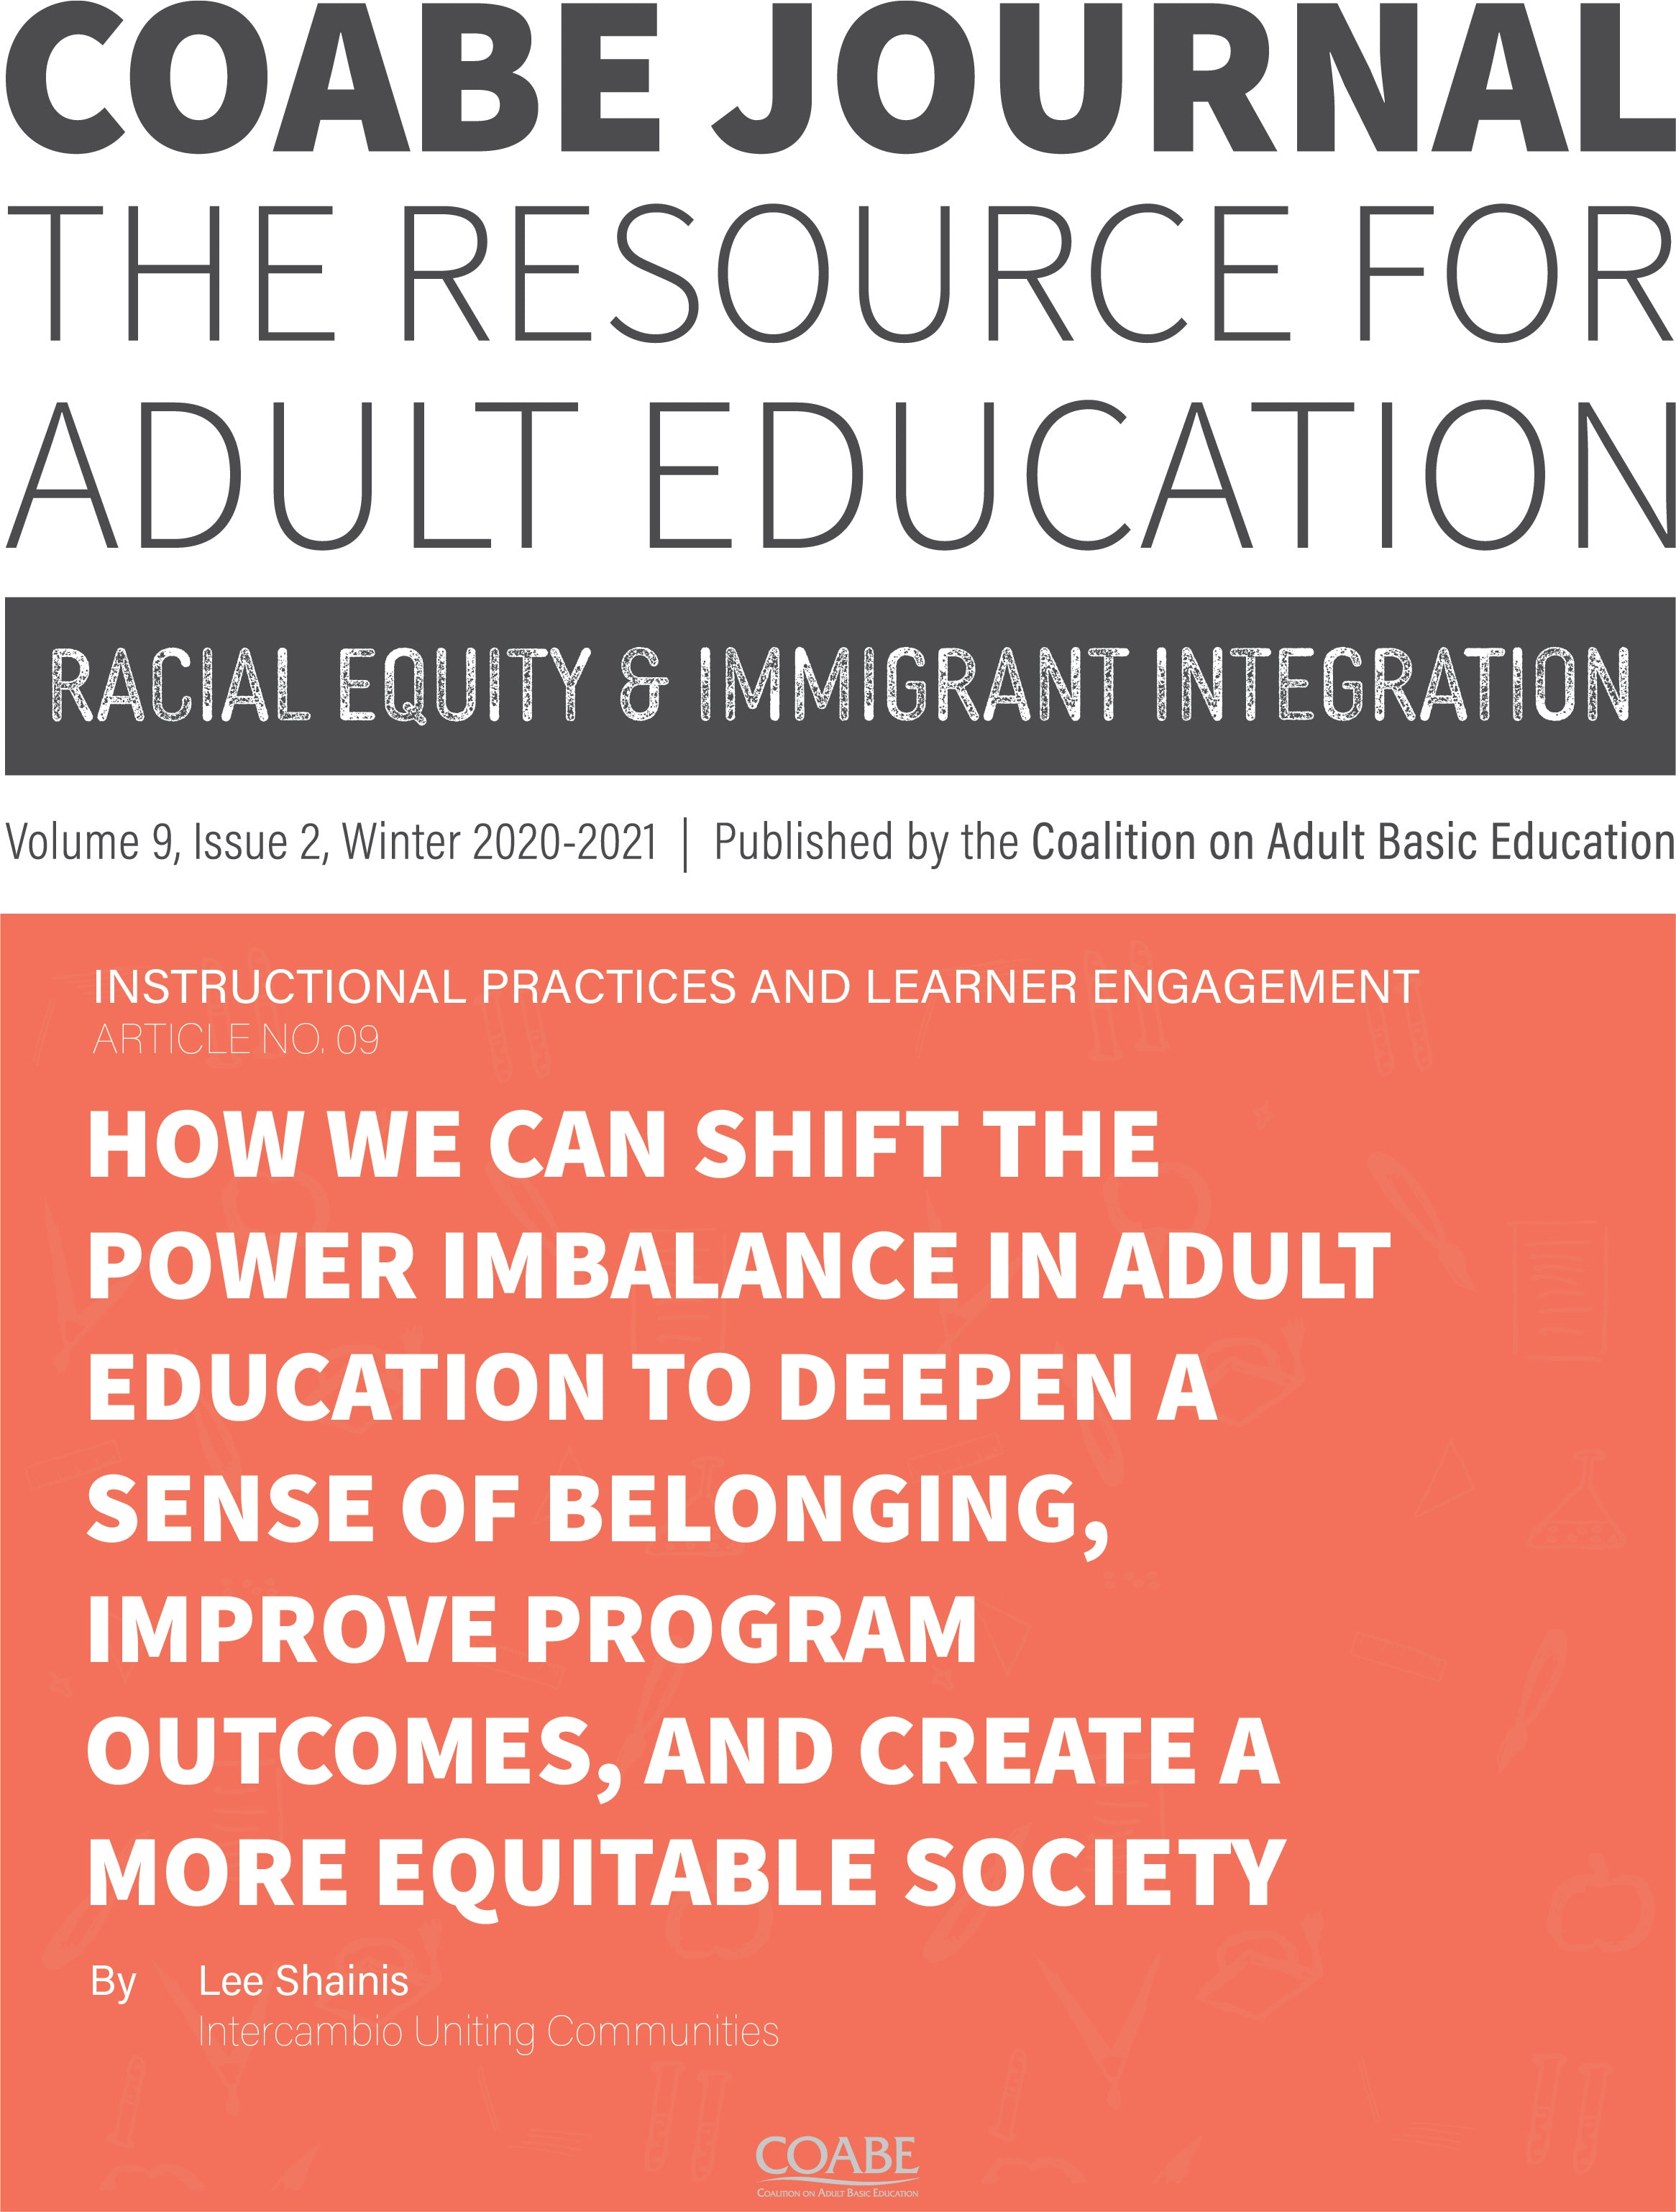 Article 09 / How We Can Shift the Power Imbalance in Adult Education to Deepen a Sense of Belonging, Improve Program Outcomes, and Create a More Equitable Society